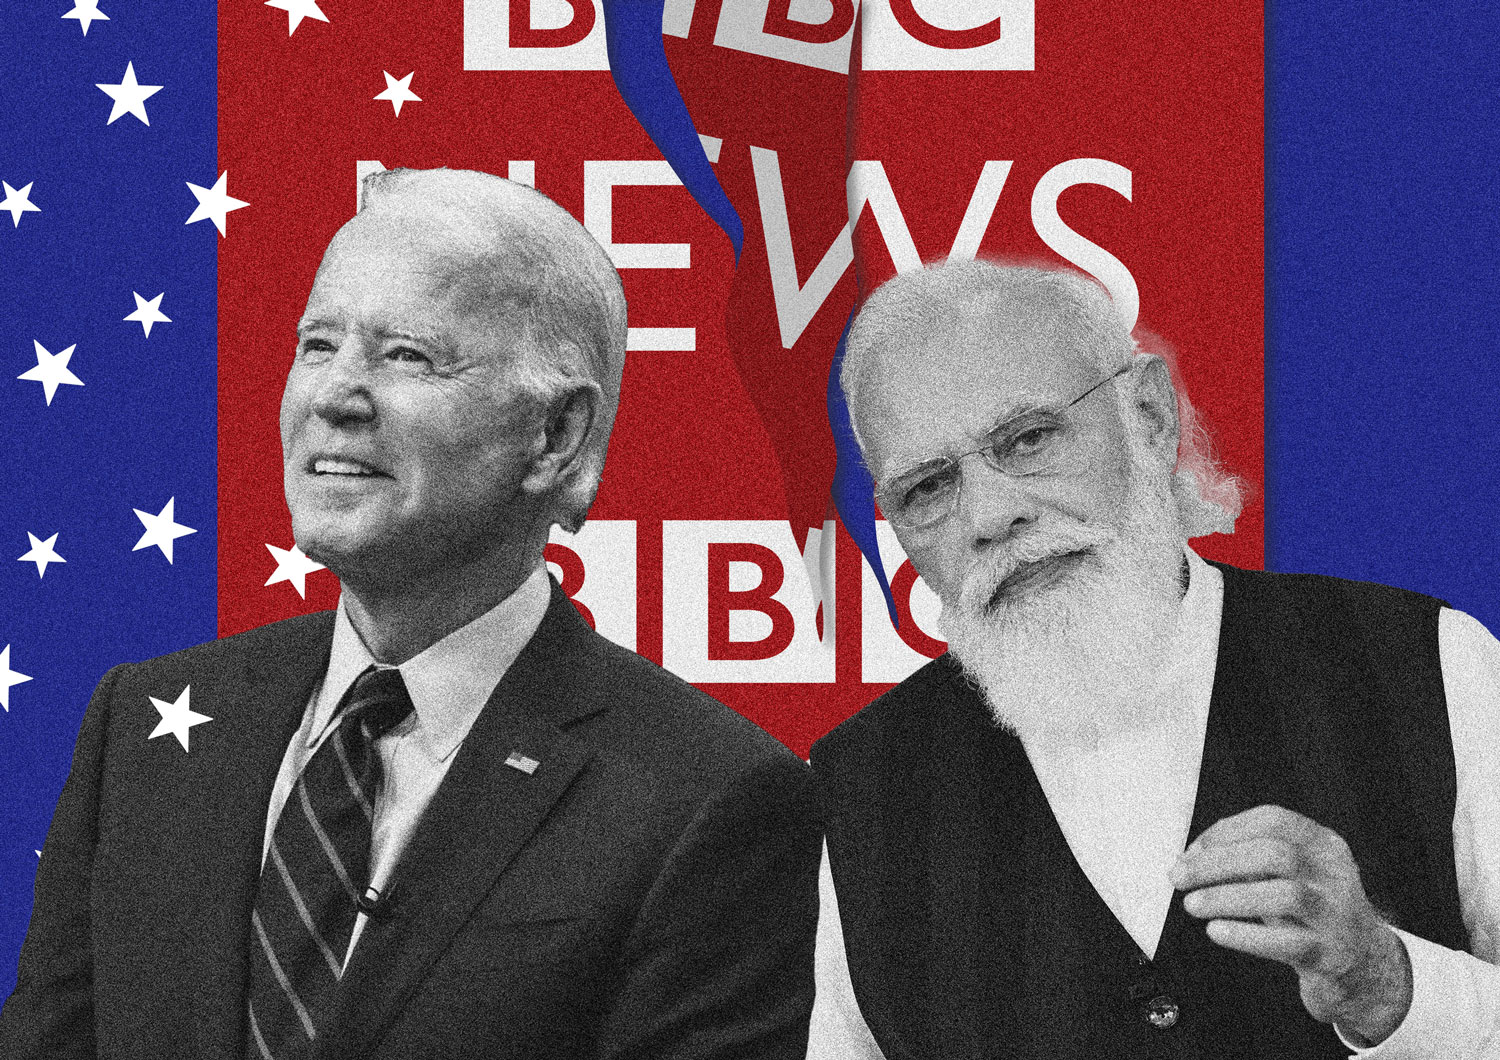 BBC saga illustrates that the West cares for its interests, not Indian democracy